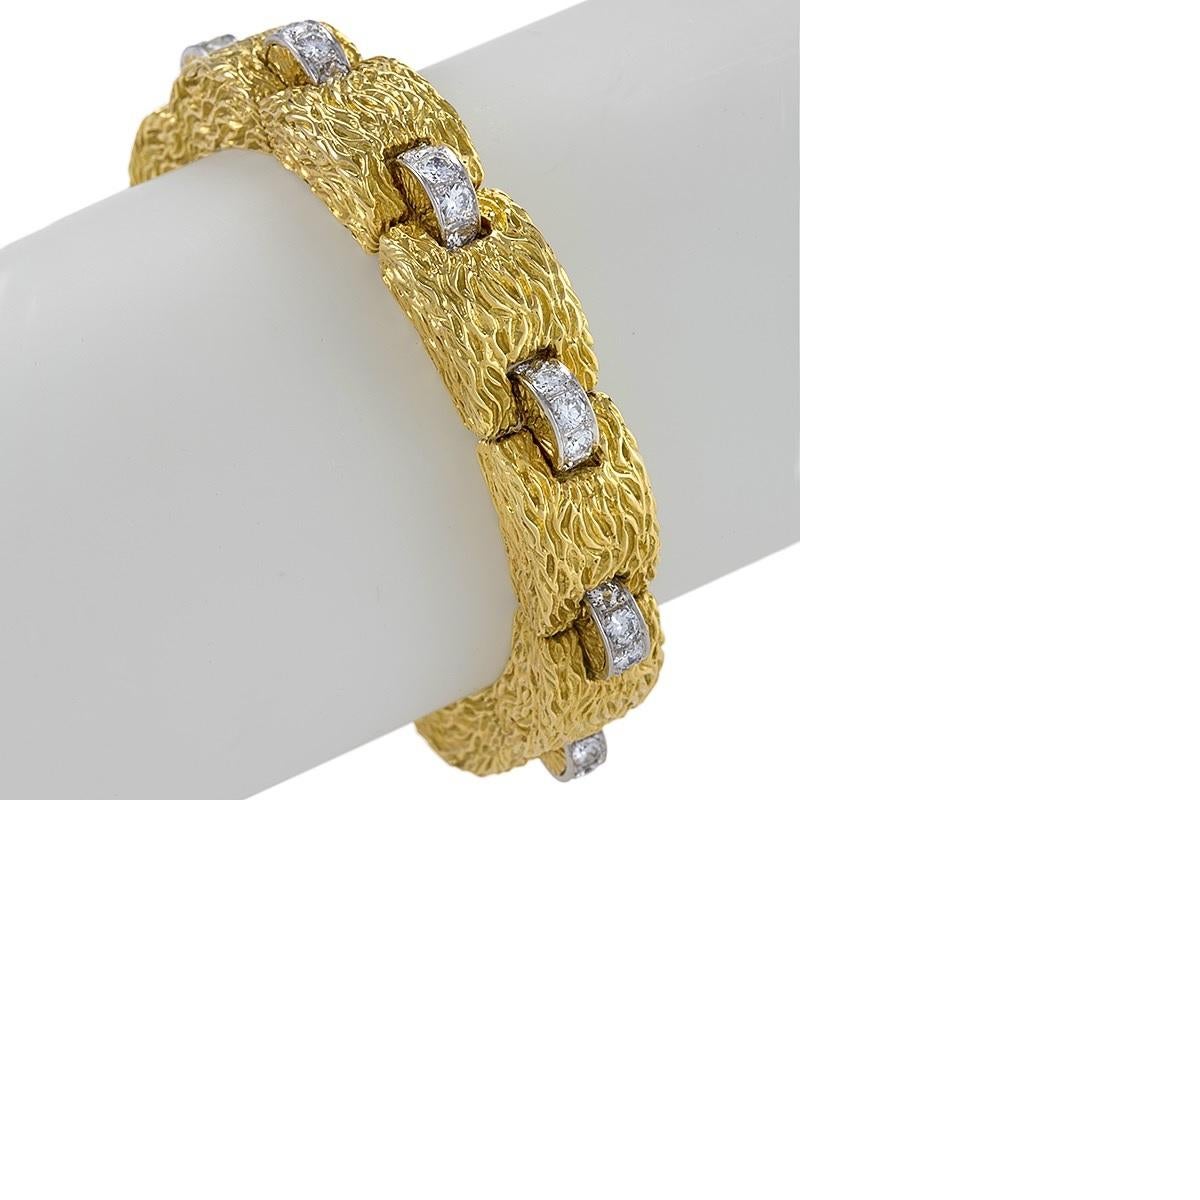 An 18 karat gold bracelet with diamond by David Webb. The bracelet has a 50 round platinum set diamonds with a G-H-VS clarity with an approximate total weight of 5.00 carats. The bracelet is composed of rectangular bombé links hammered in a wavy